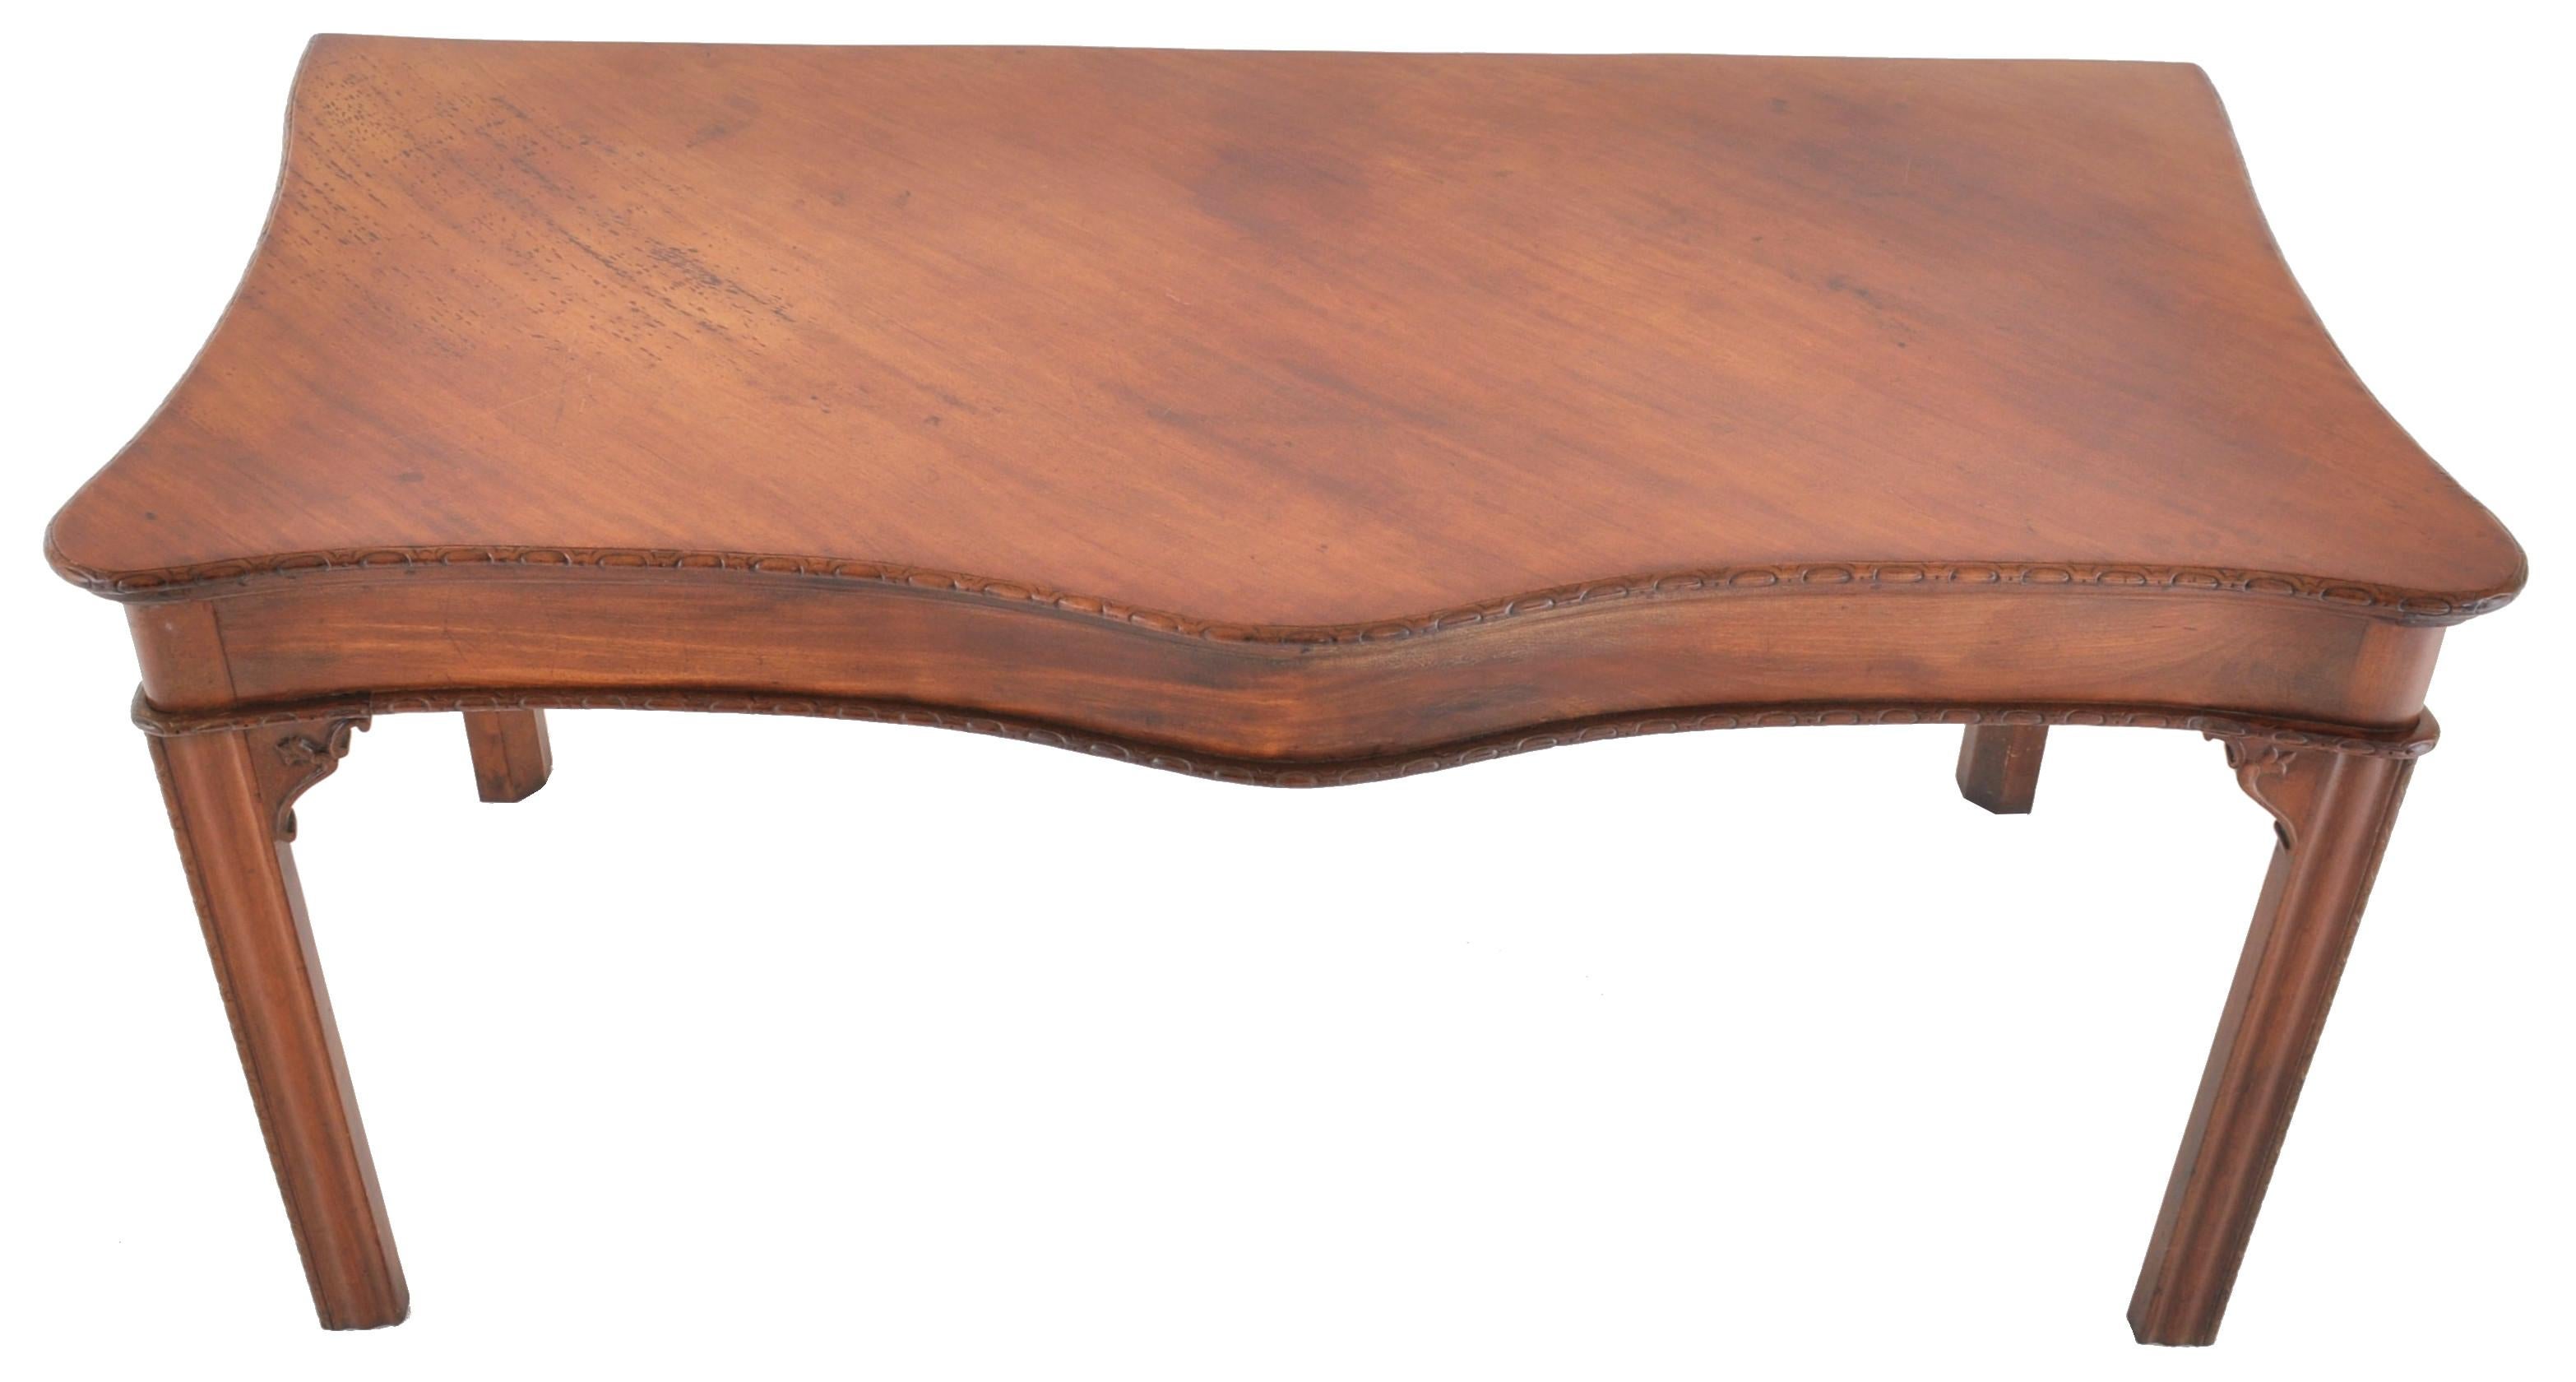 An important antique Irish George III Chippendale mahogany serving table/sideboard, circa 1770. The table made from the finest Cuban mahogany, having a serpentine shaped front with a gadrooned edge, the legs having carved Chinese style brackets and